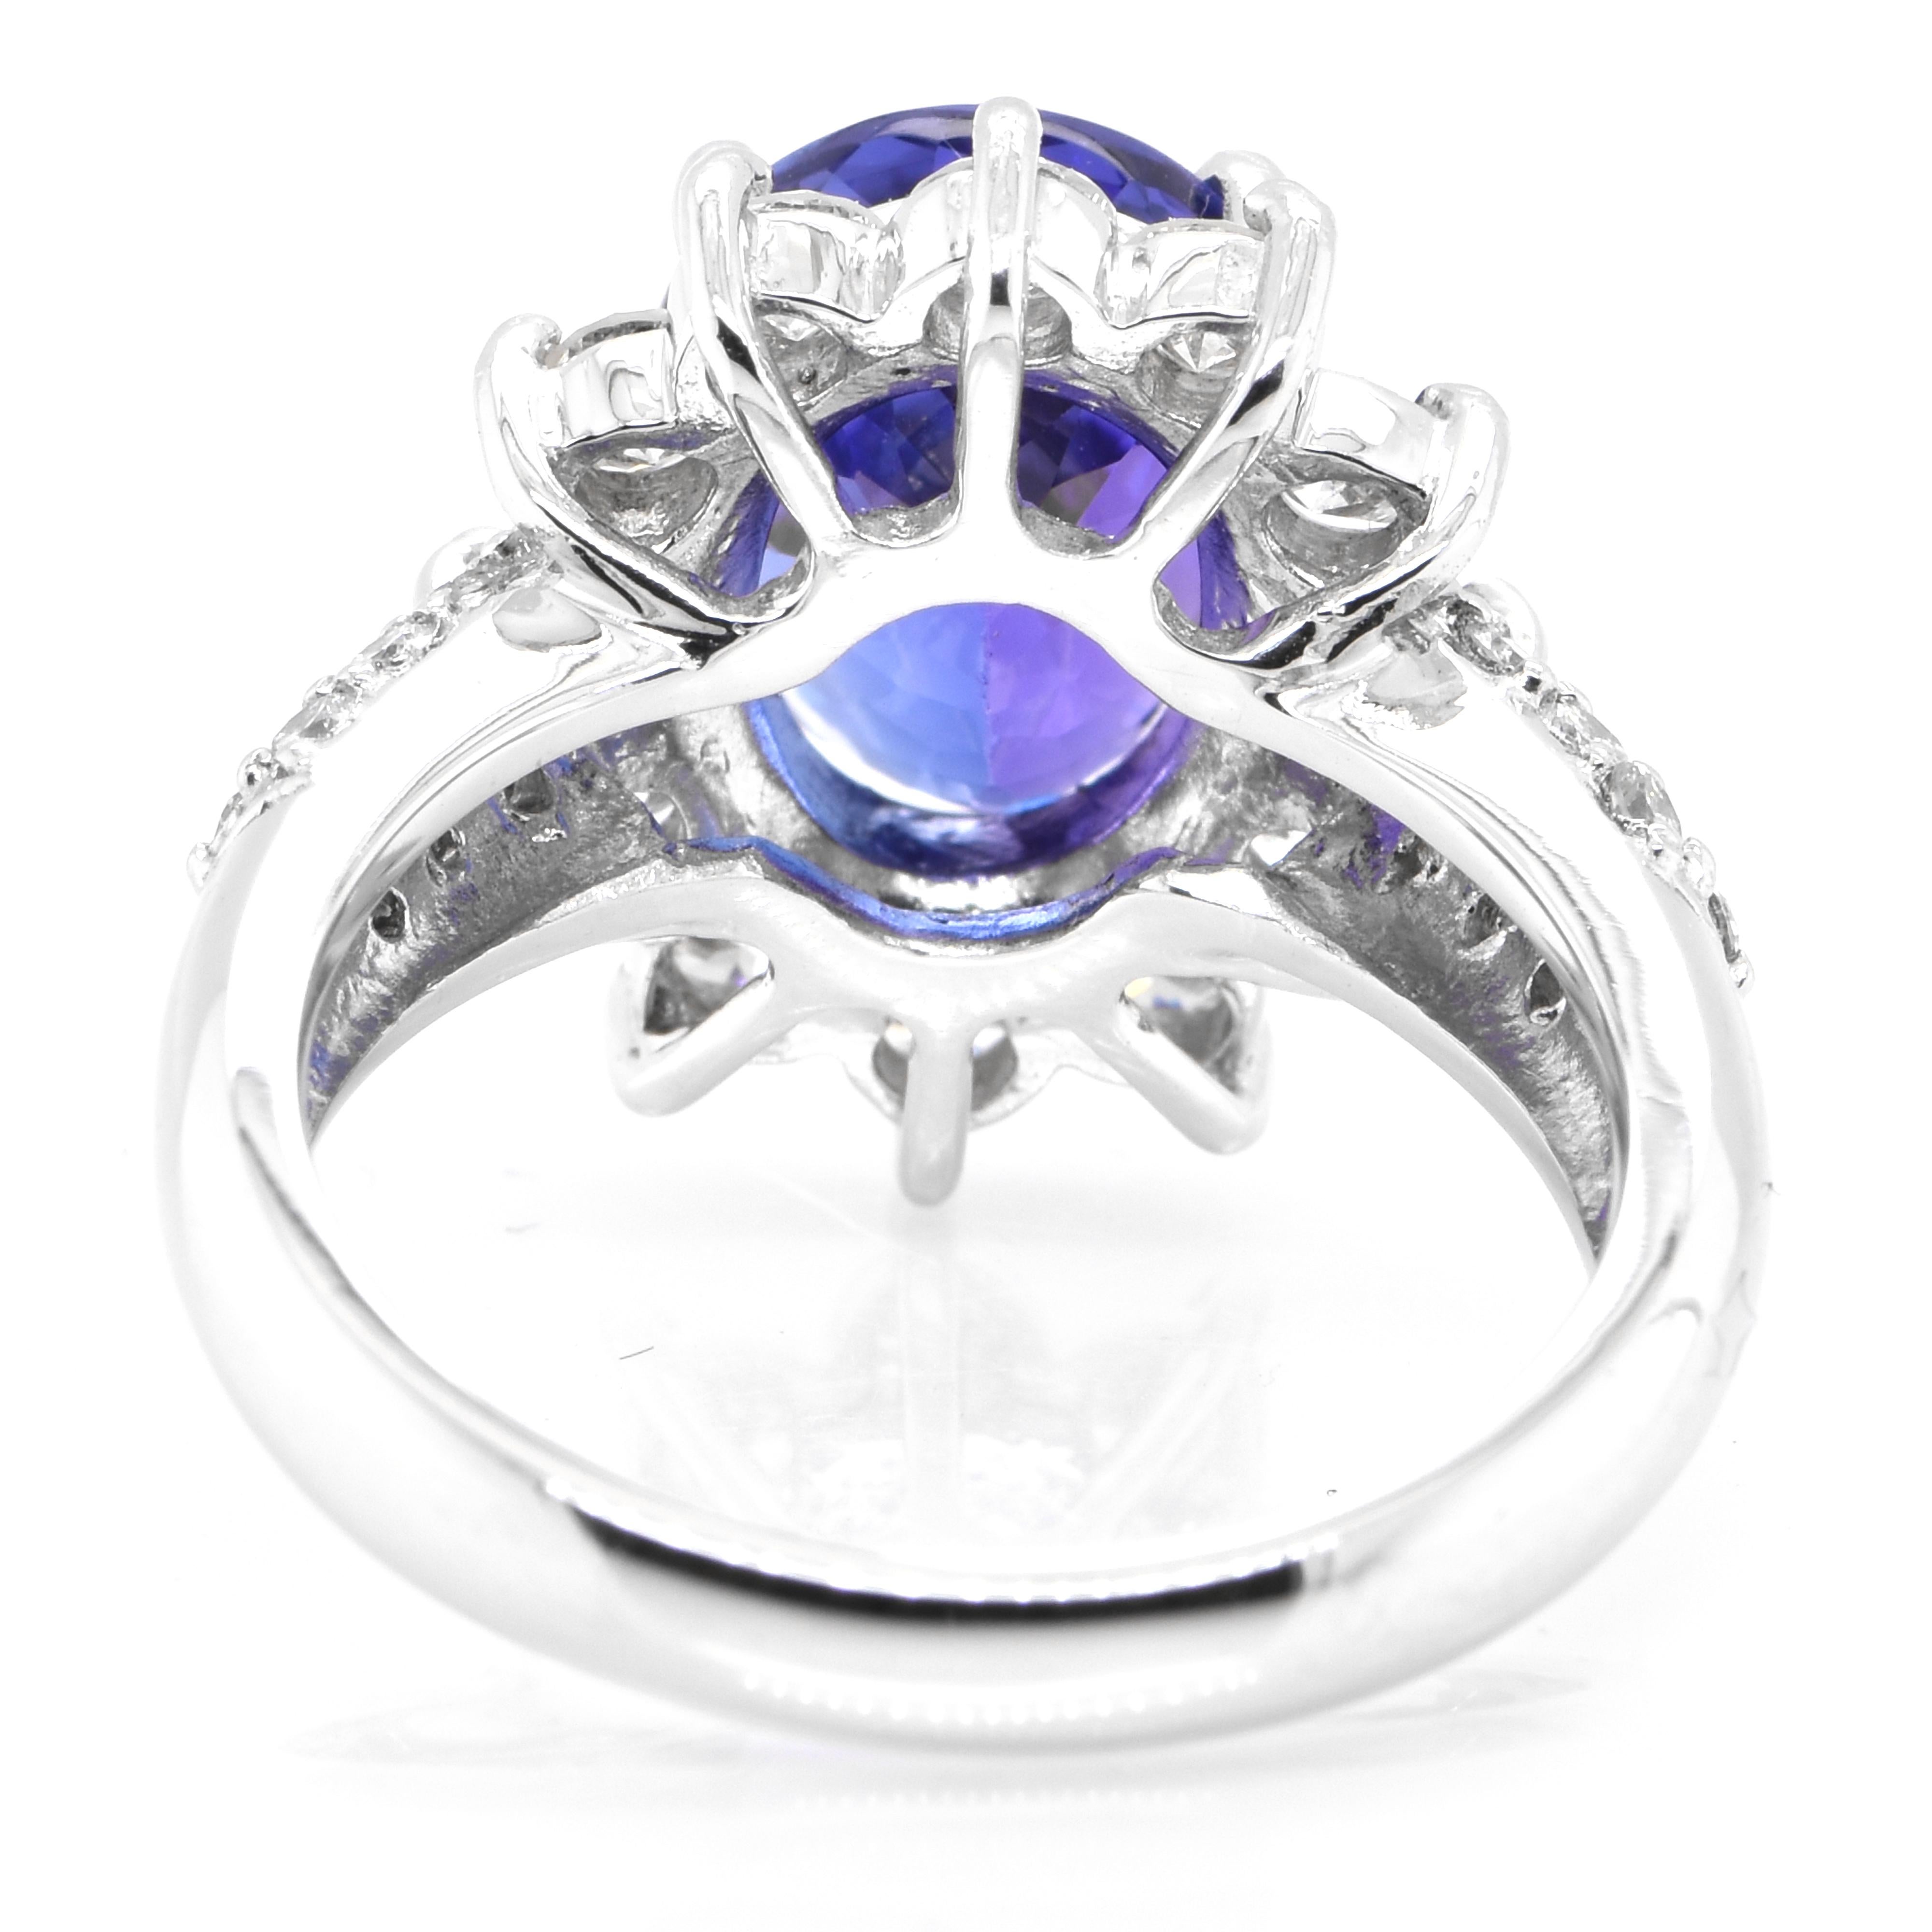 Women's 4.14 Carat Natural Oval-Cut Tanzanite and Diamond Cocktail Ring Set in Platinum For Sale